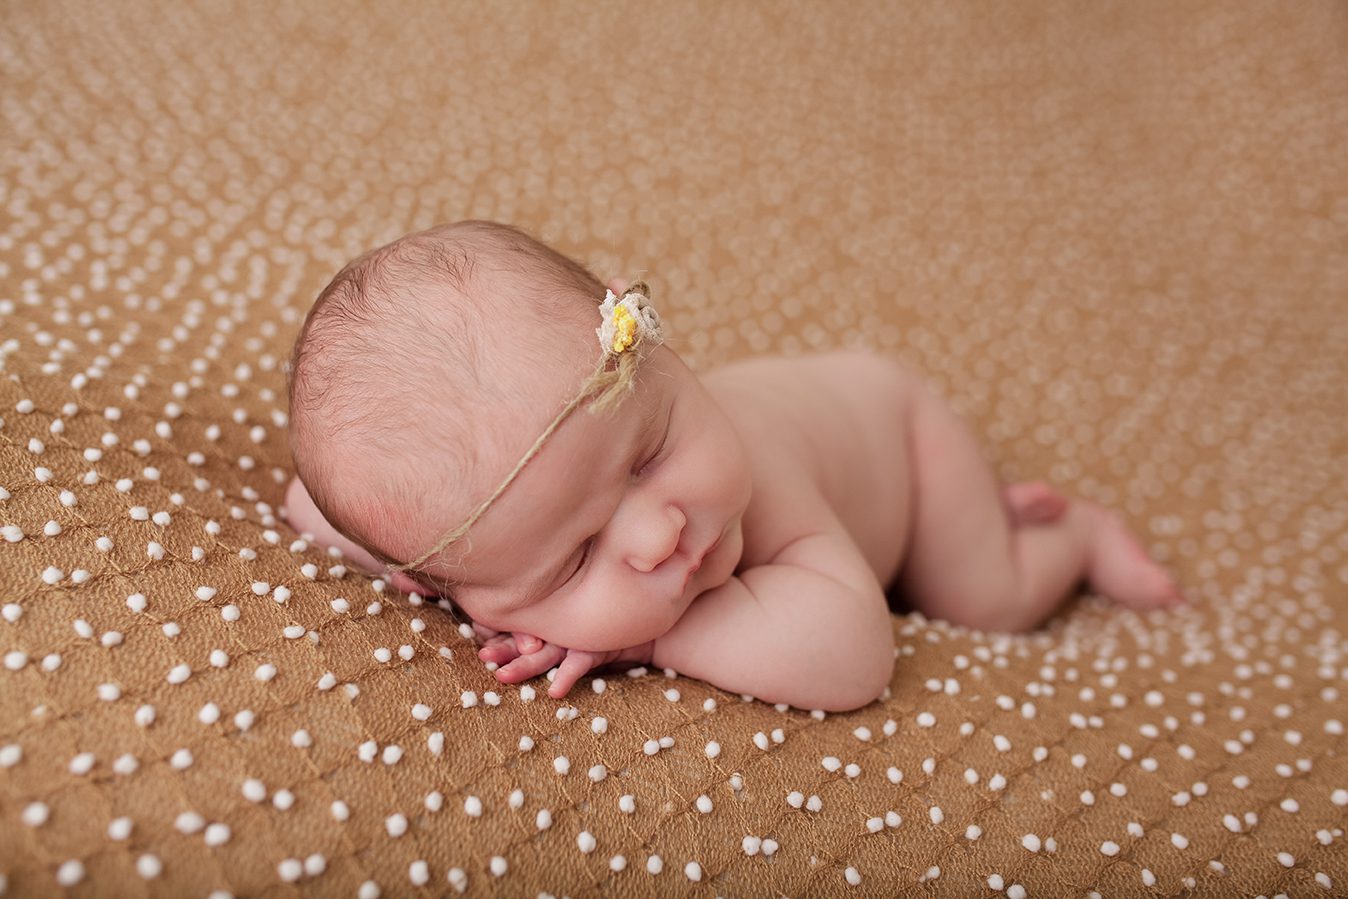 edmonton newborn photographer - posed on her tummy with head and hands